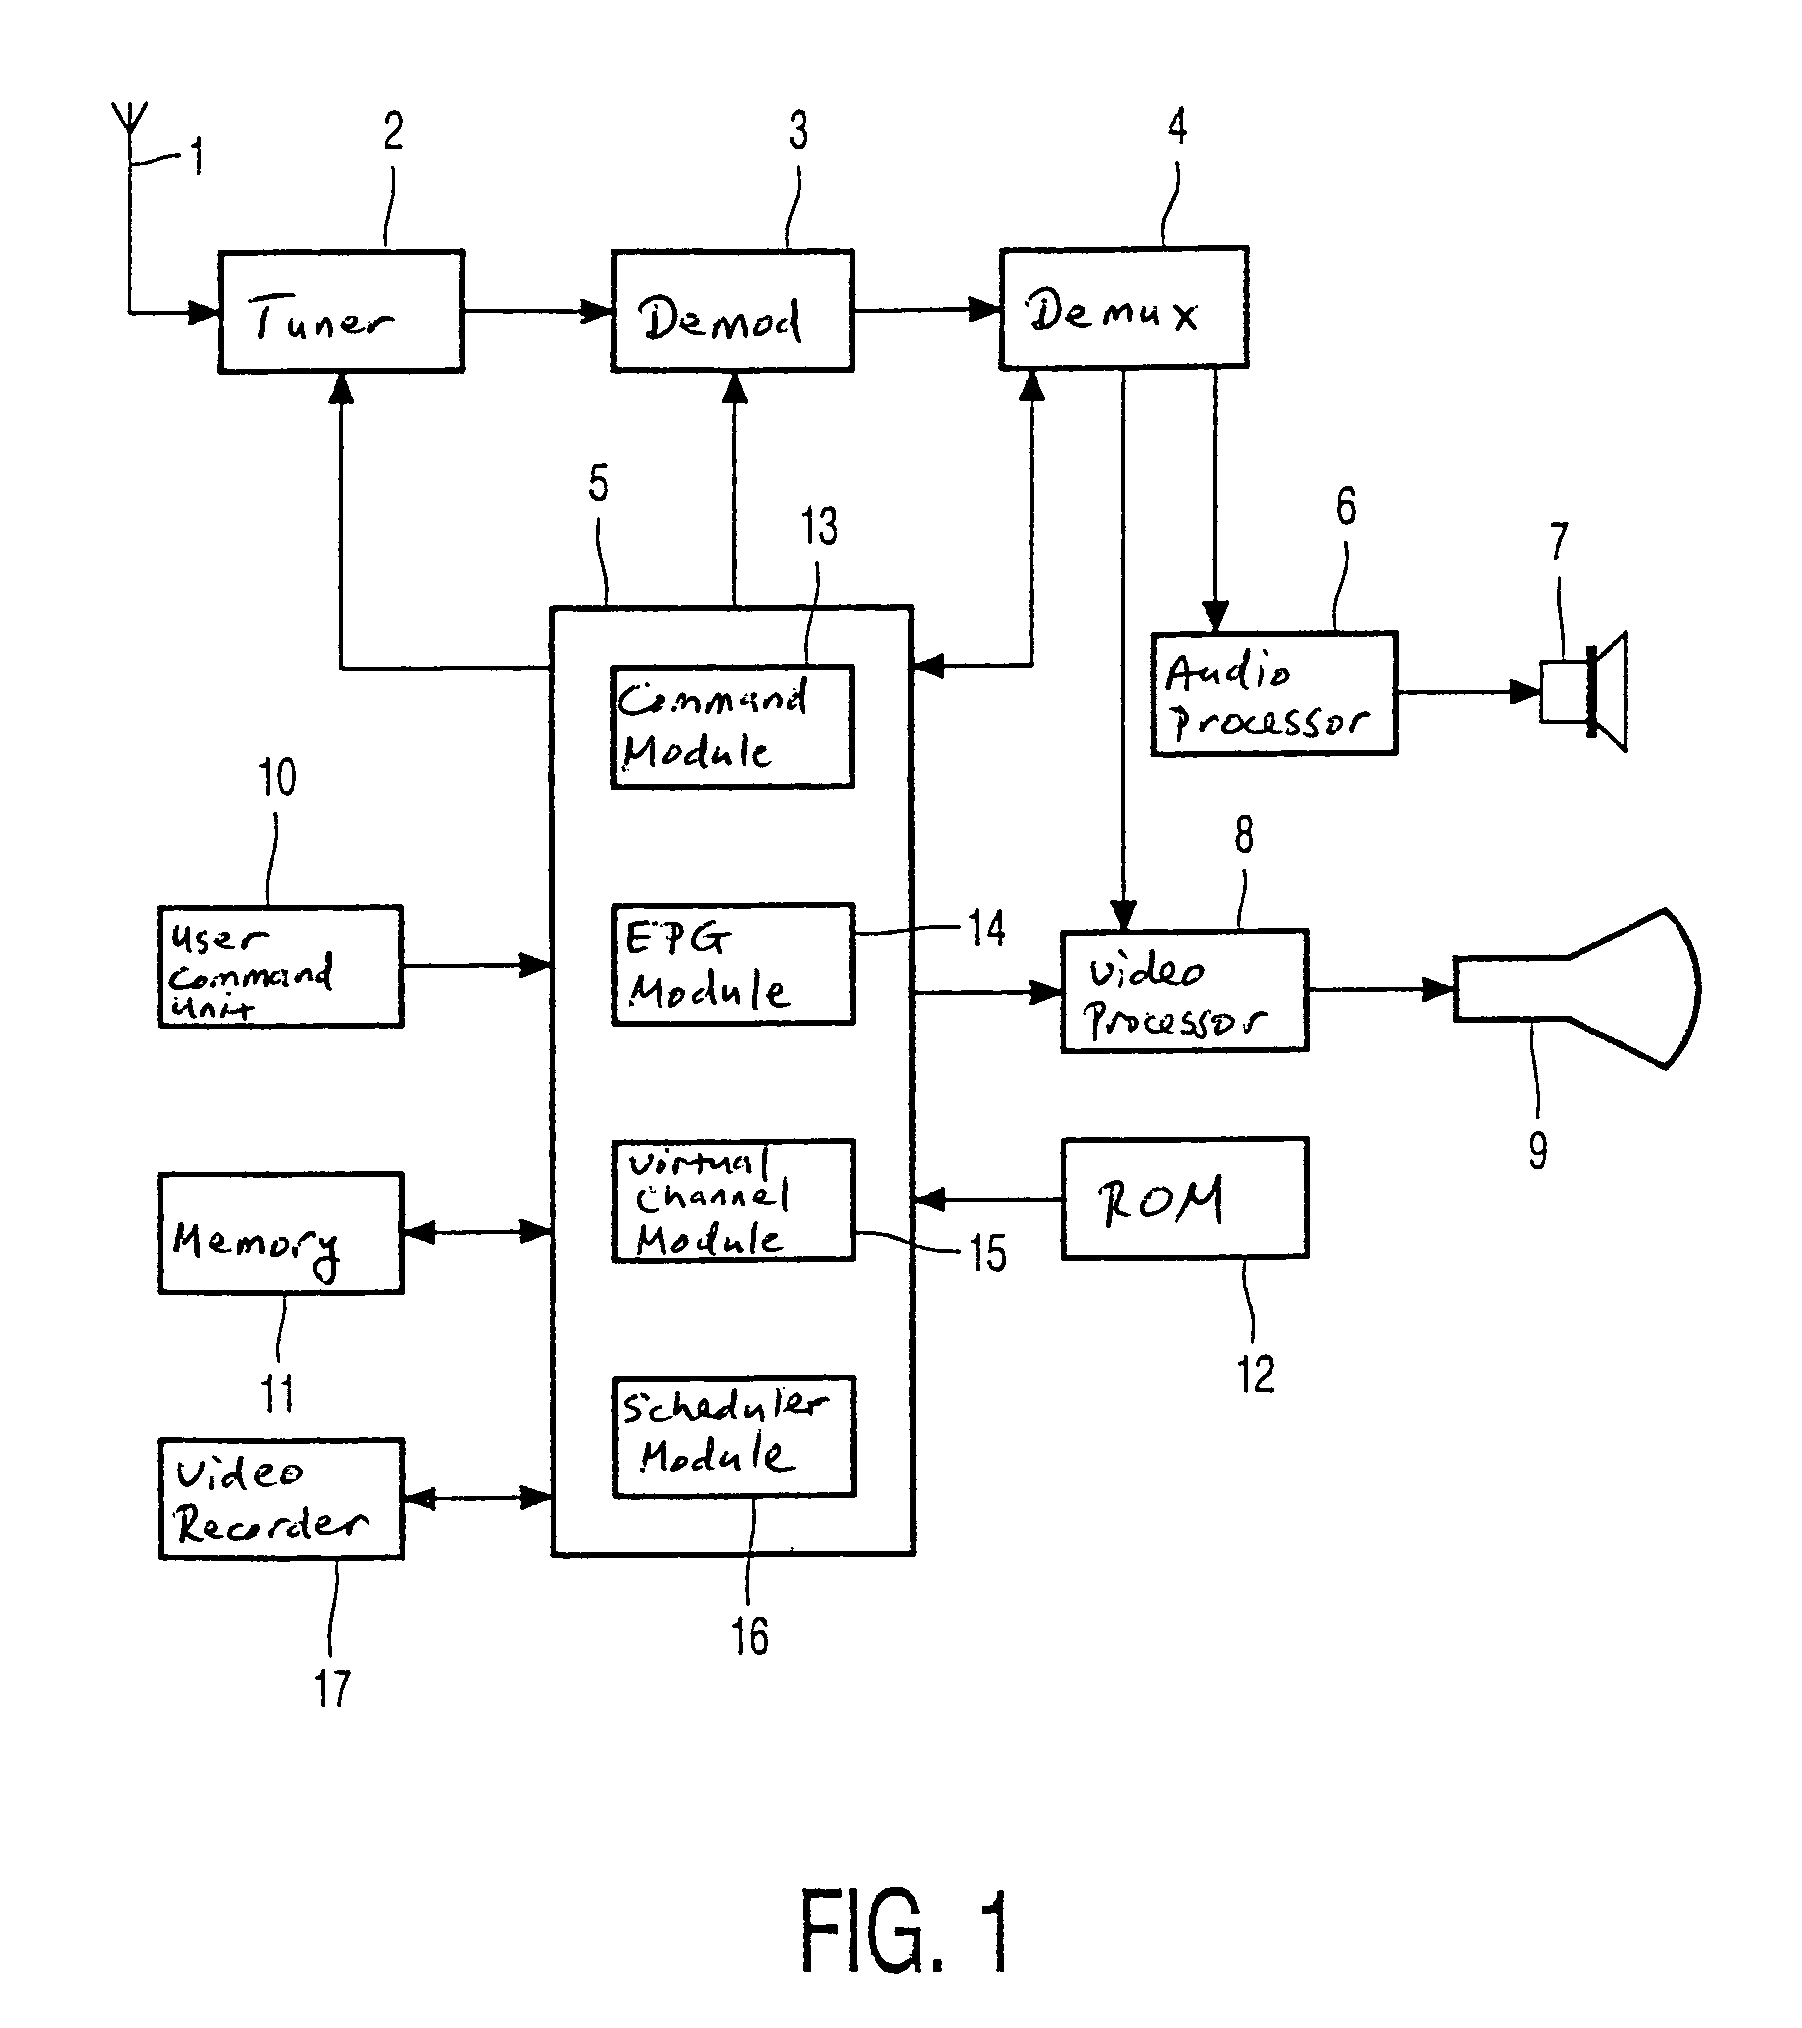 Apparatus and method for selecting, scheduling, and reproducing programs while accounting for scheduling gaps